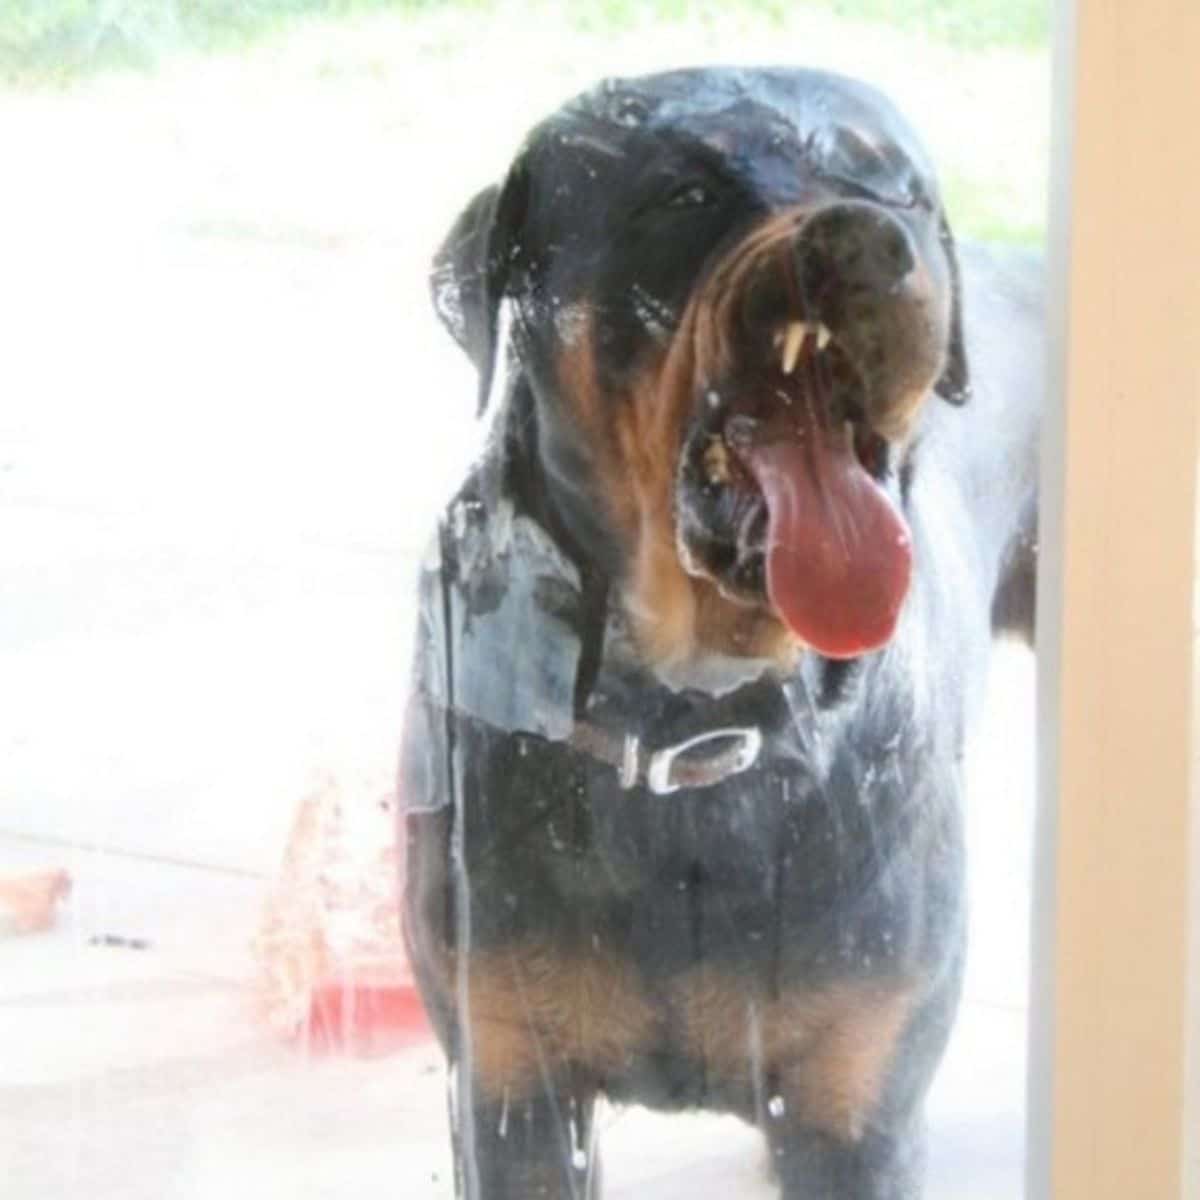 black and brown dog licking a glass